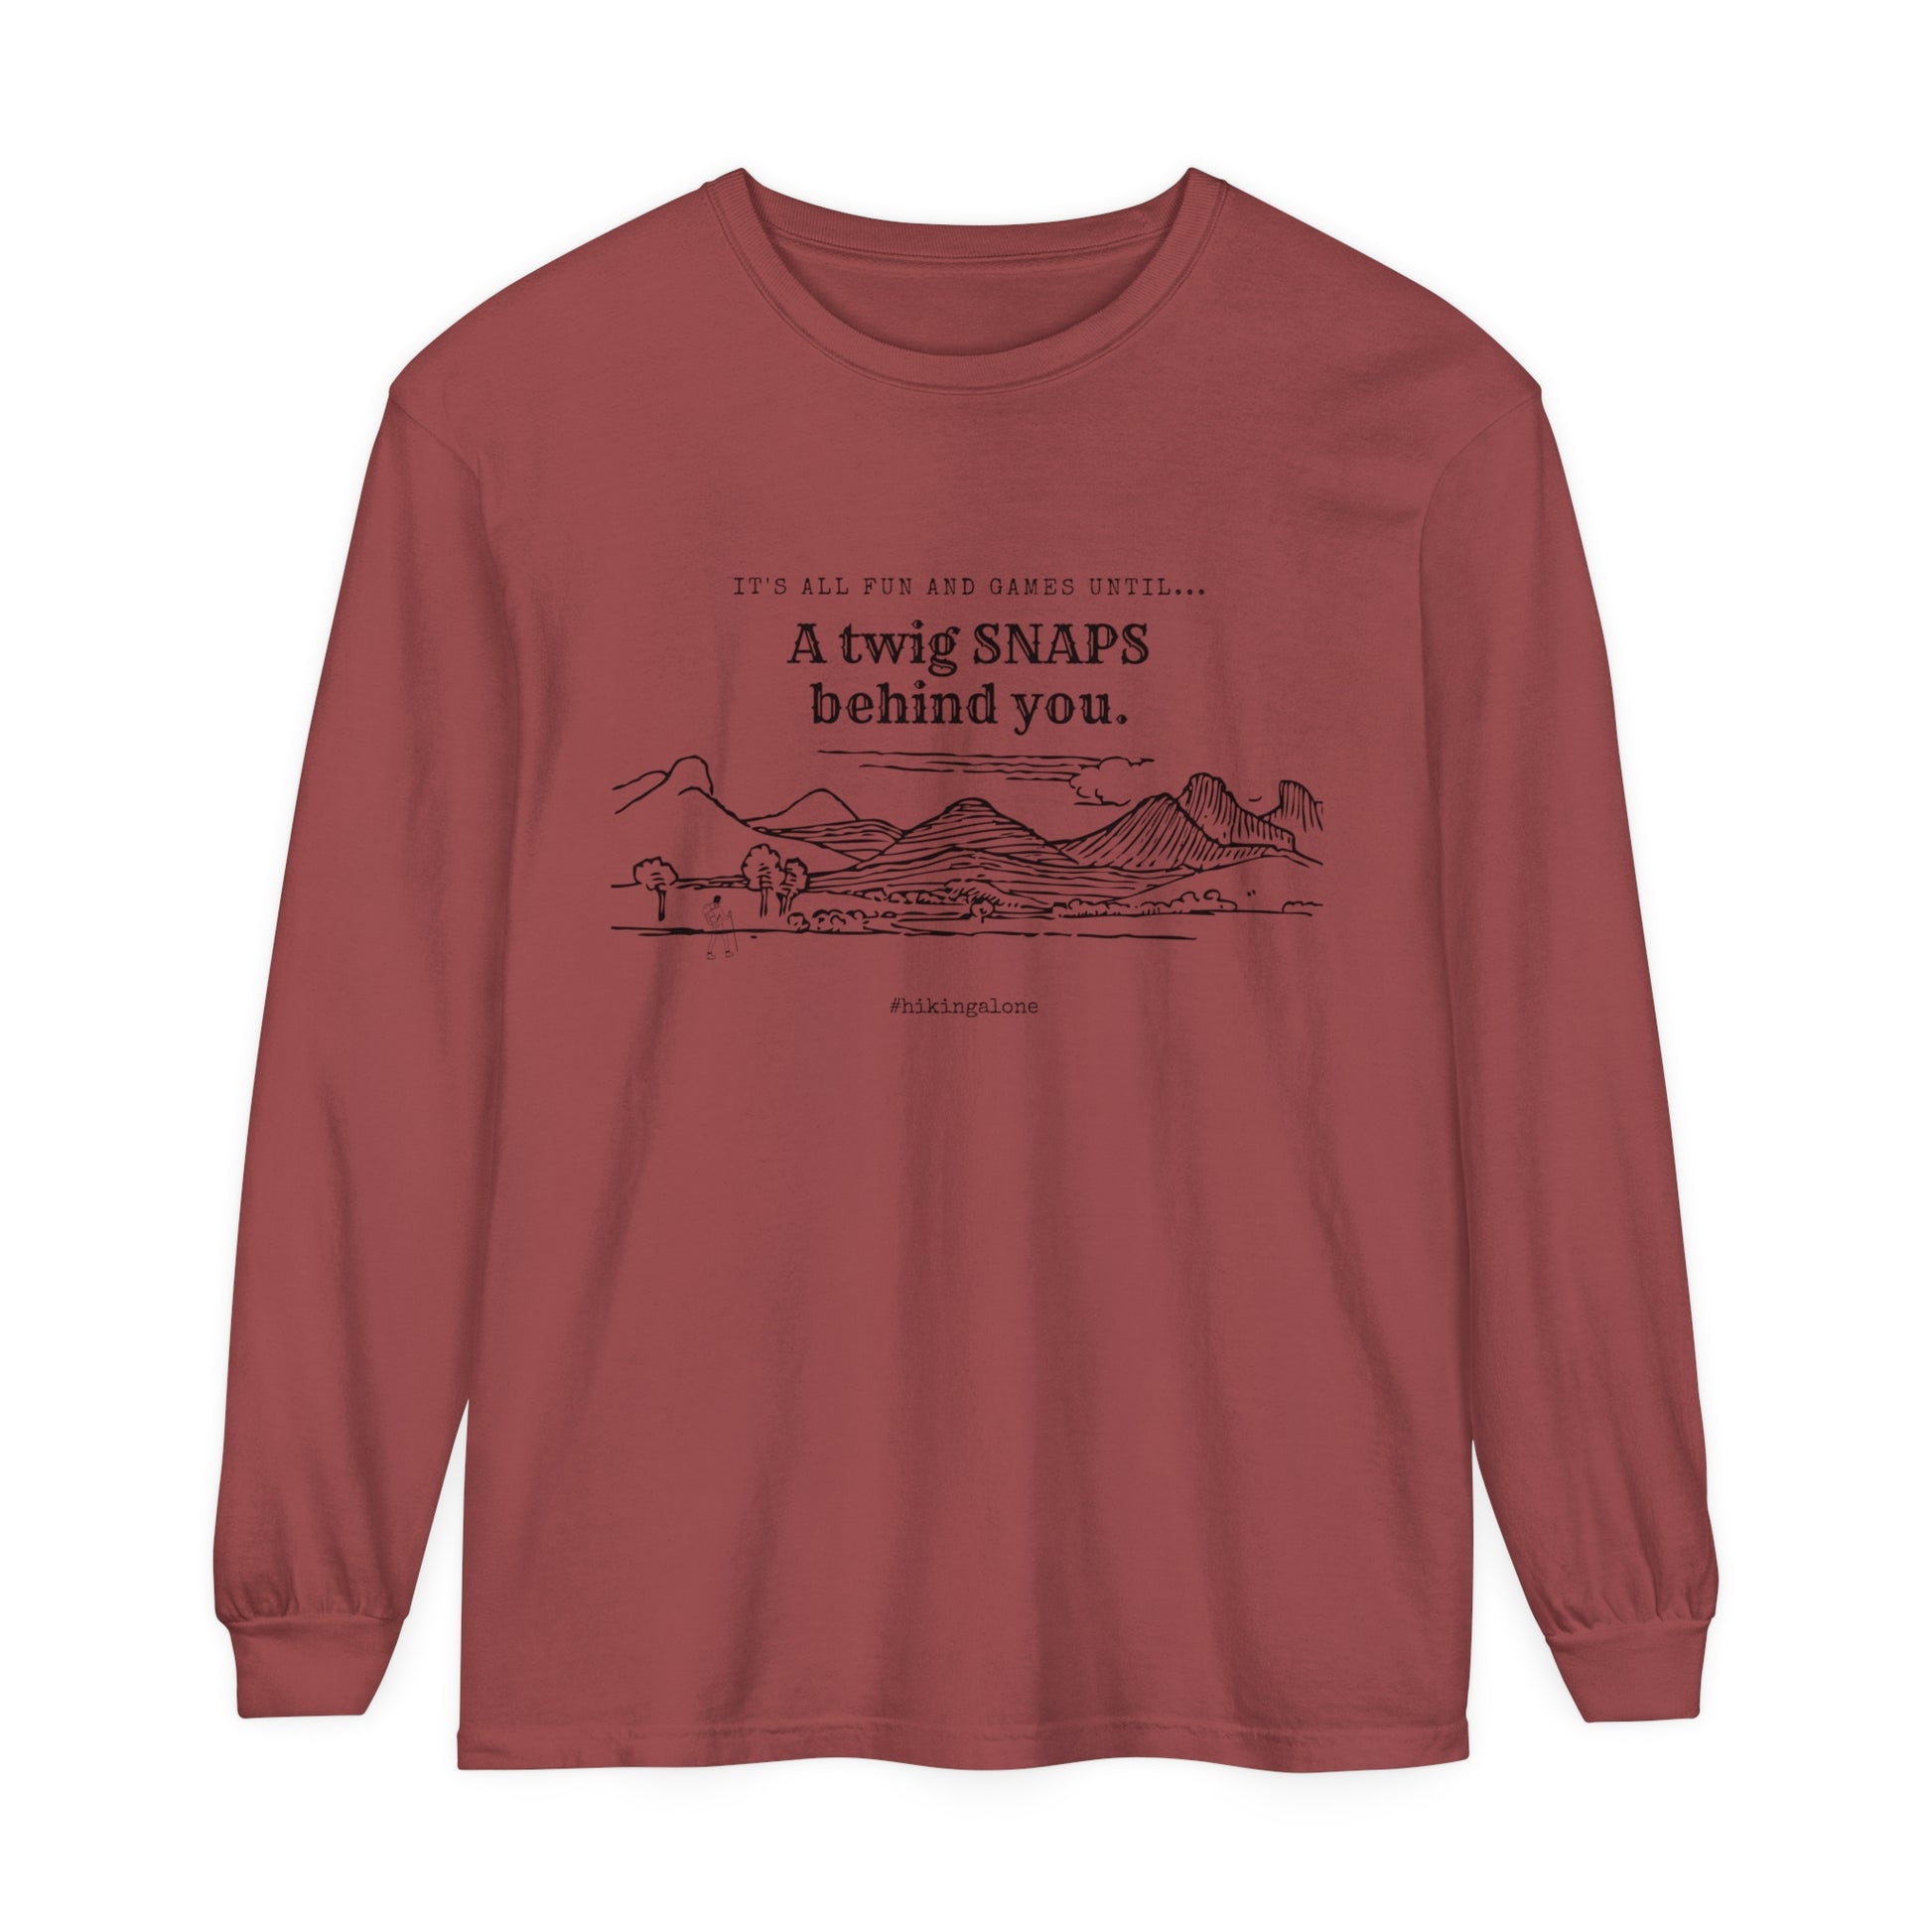 It's all fun and games until a twig snaps behind you, Mountain Explorer Long Sleeve Tee, True Crime Inspired Hiking Shirt, Comfy Comfort Colors, Solo Hiker Design, Hiking Alone Unisex Garment-dyed Long Sleeve T-Shirt, Funny shirts for hiking, shirts for hikers, Funny shirts for solo hikers, Solo hiking shirt